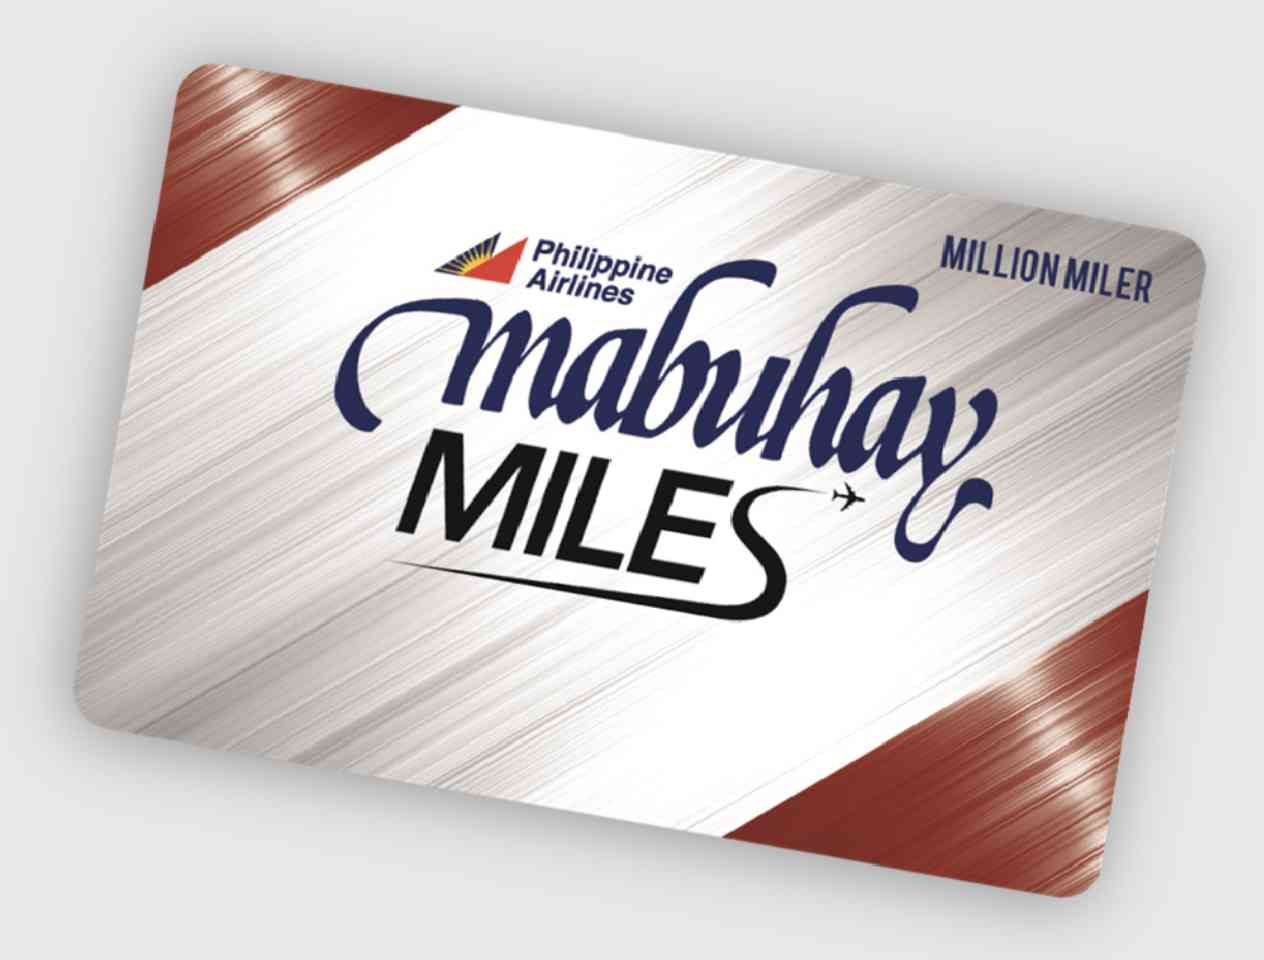 PAL Mabuhay miles frequent flyer program